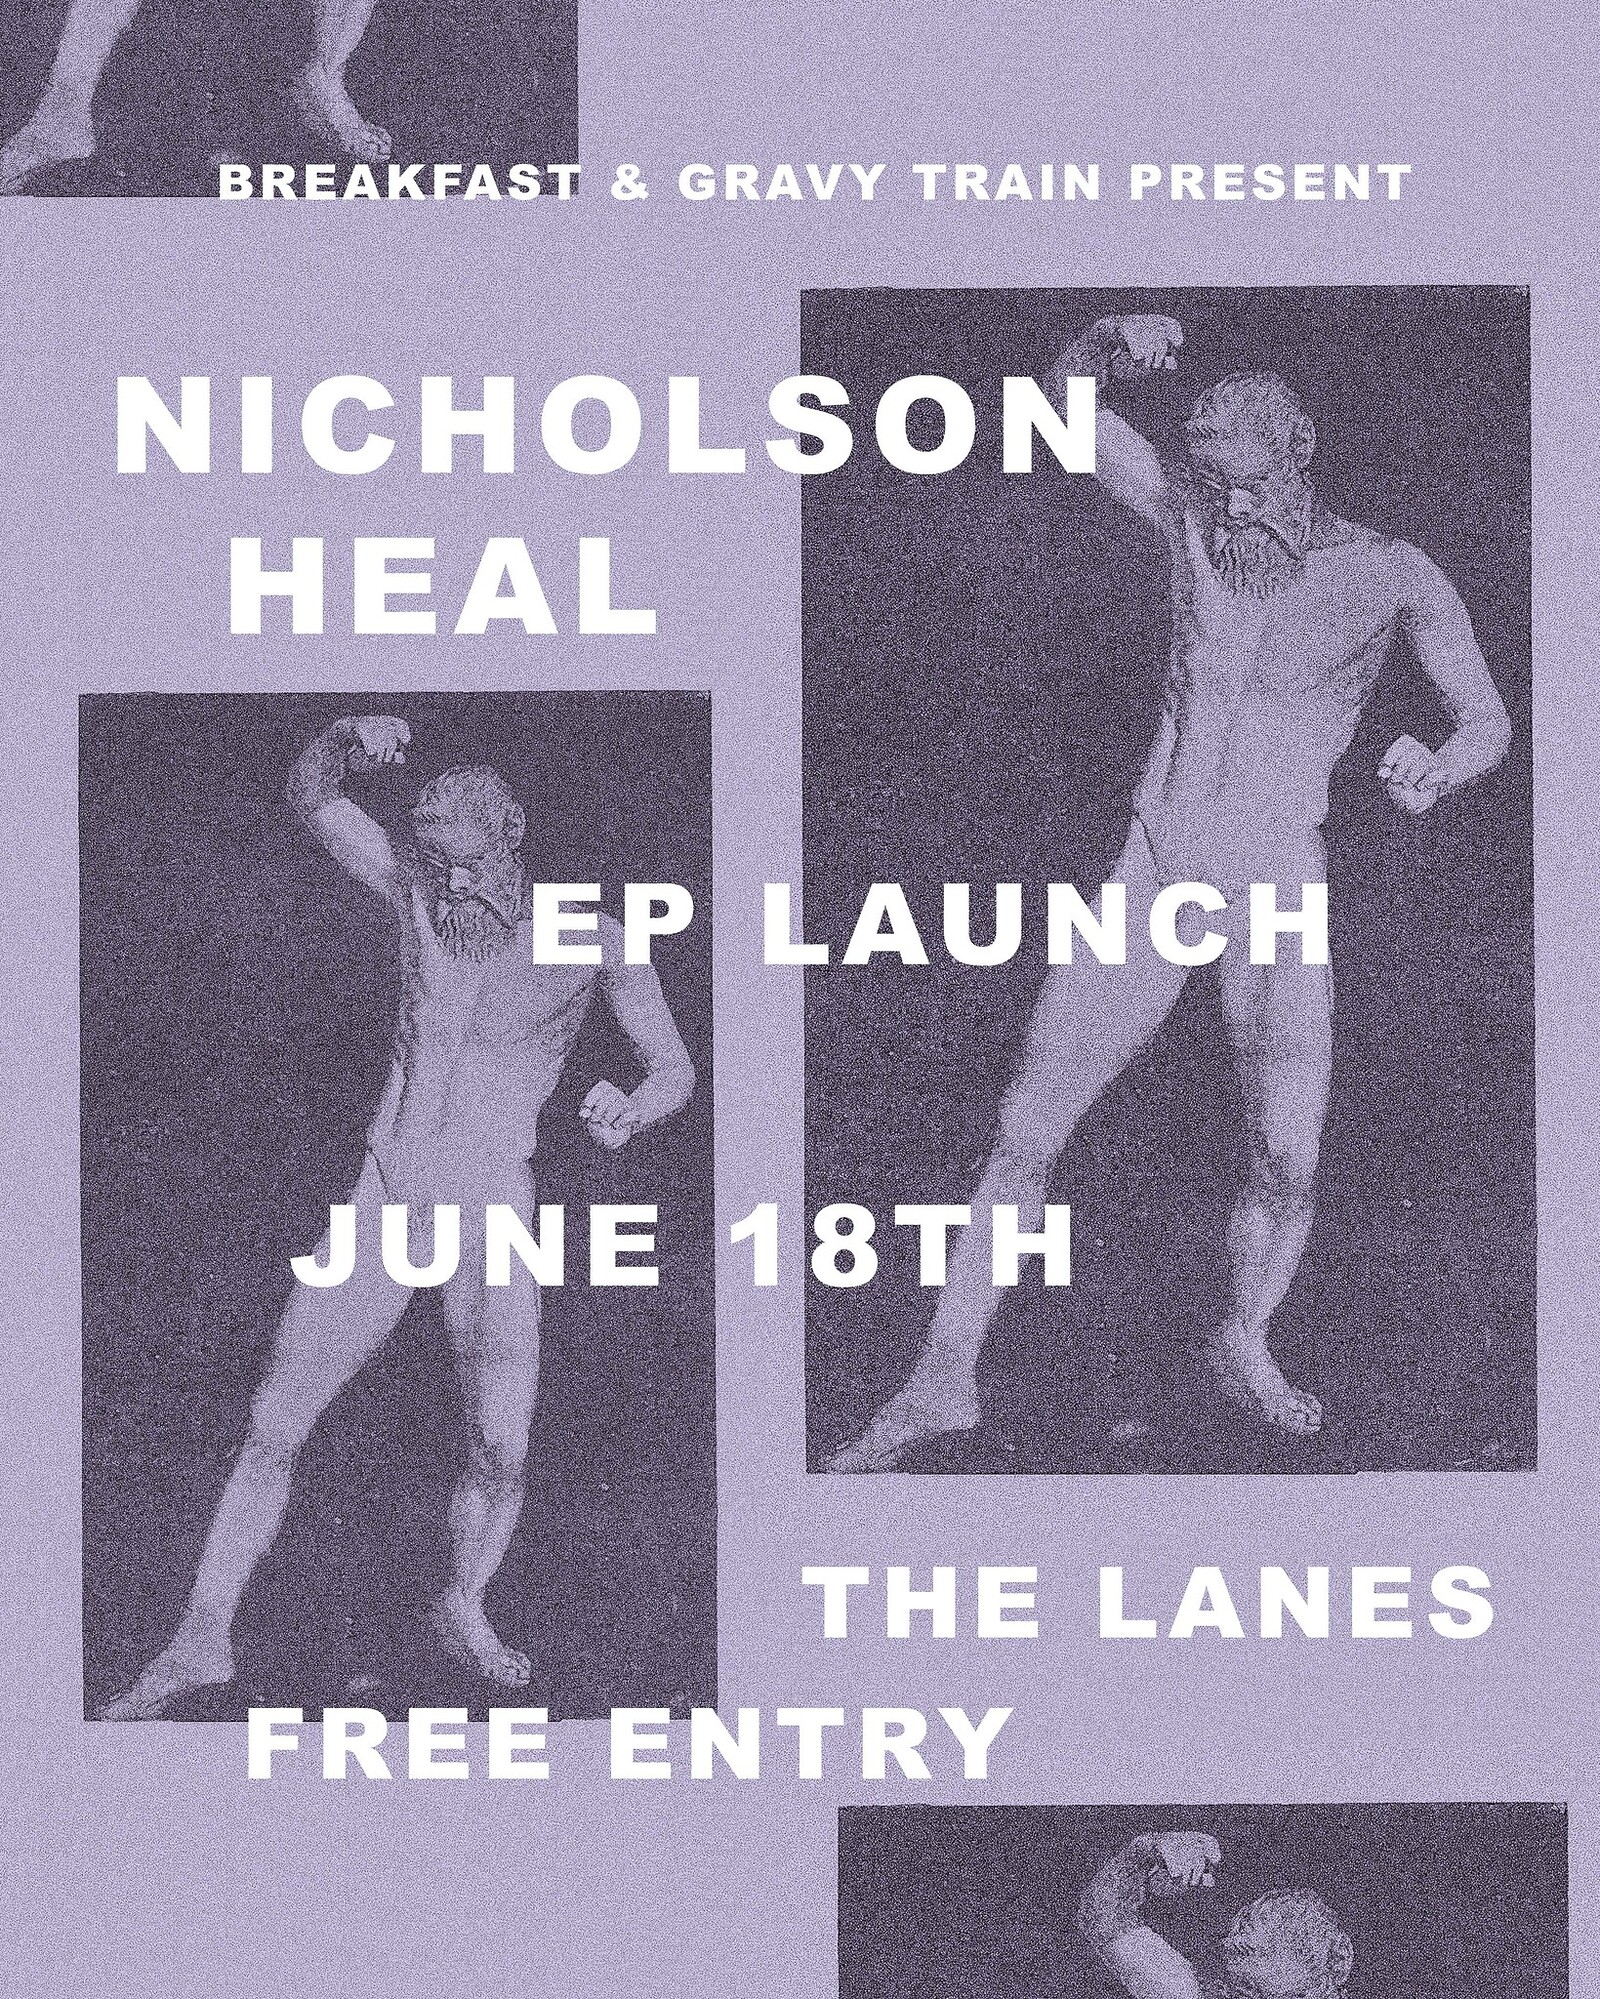 NICHOLSON HEAL + SUDS at The Lanes